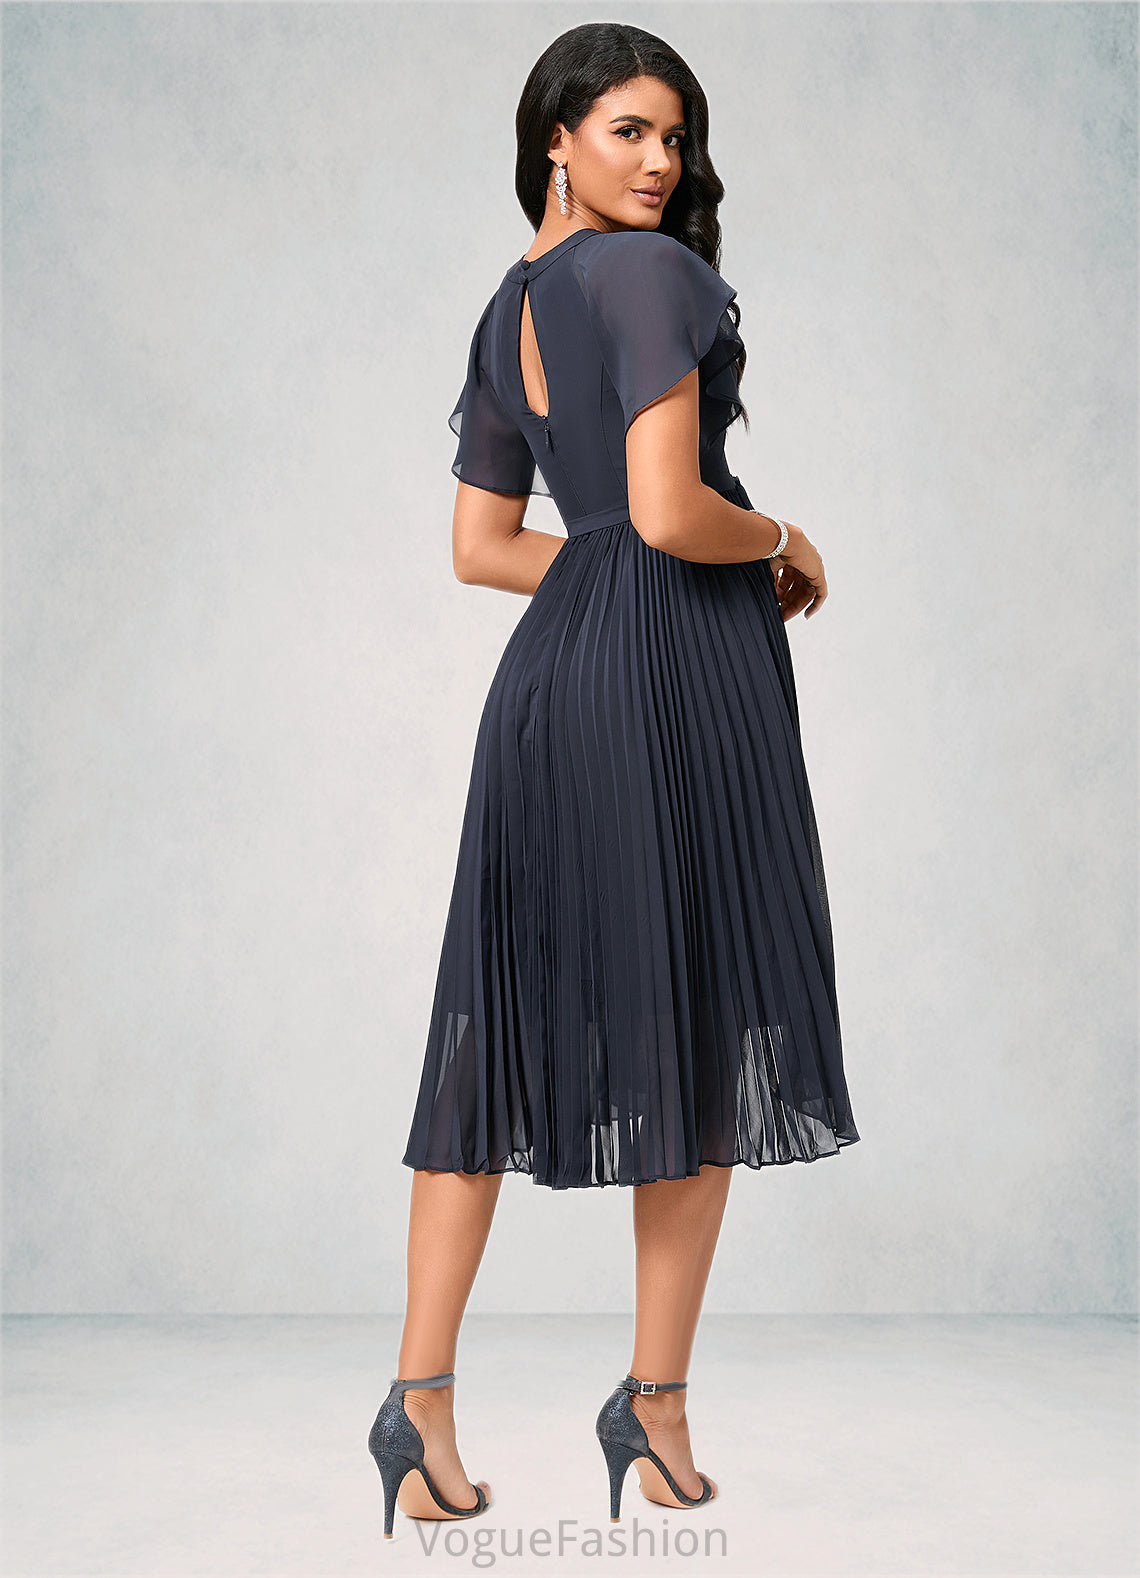 Hedda A-line Scoop Asymmetrical Chiffon Cocktail Dress With Bow Pleated DKP0022530